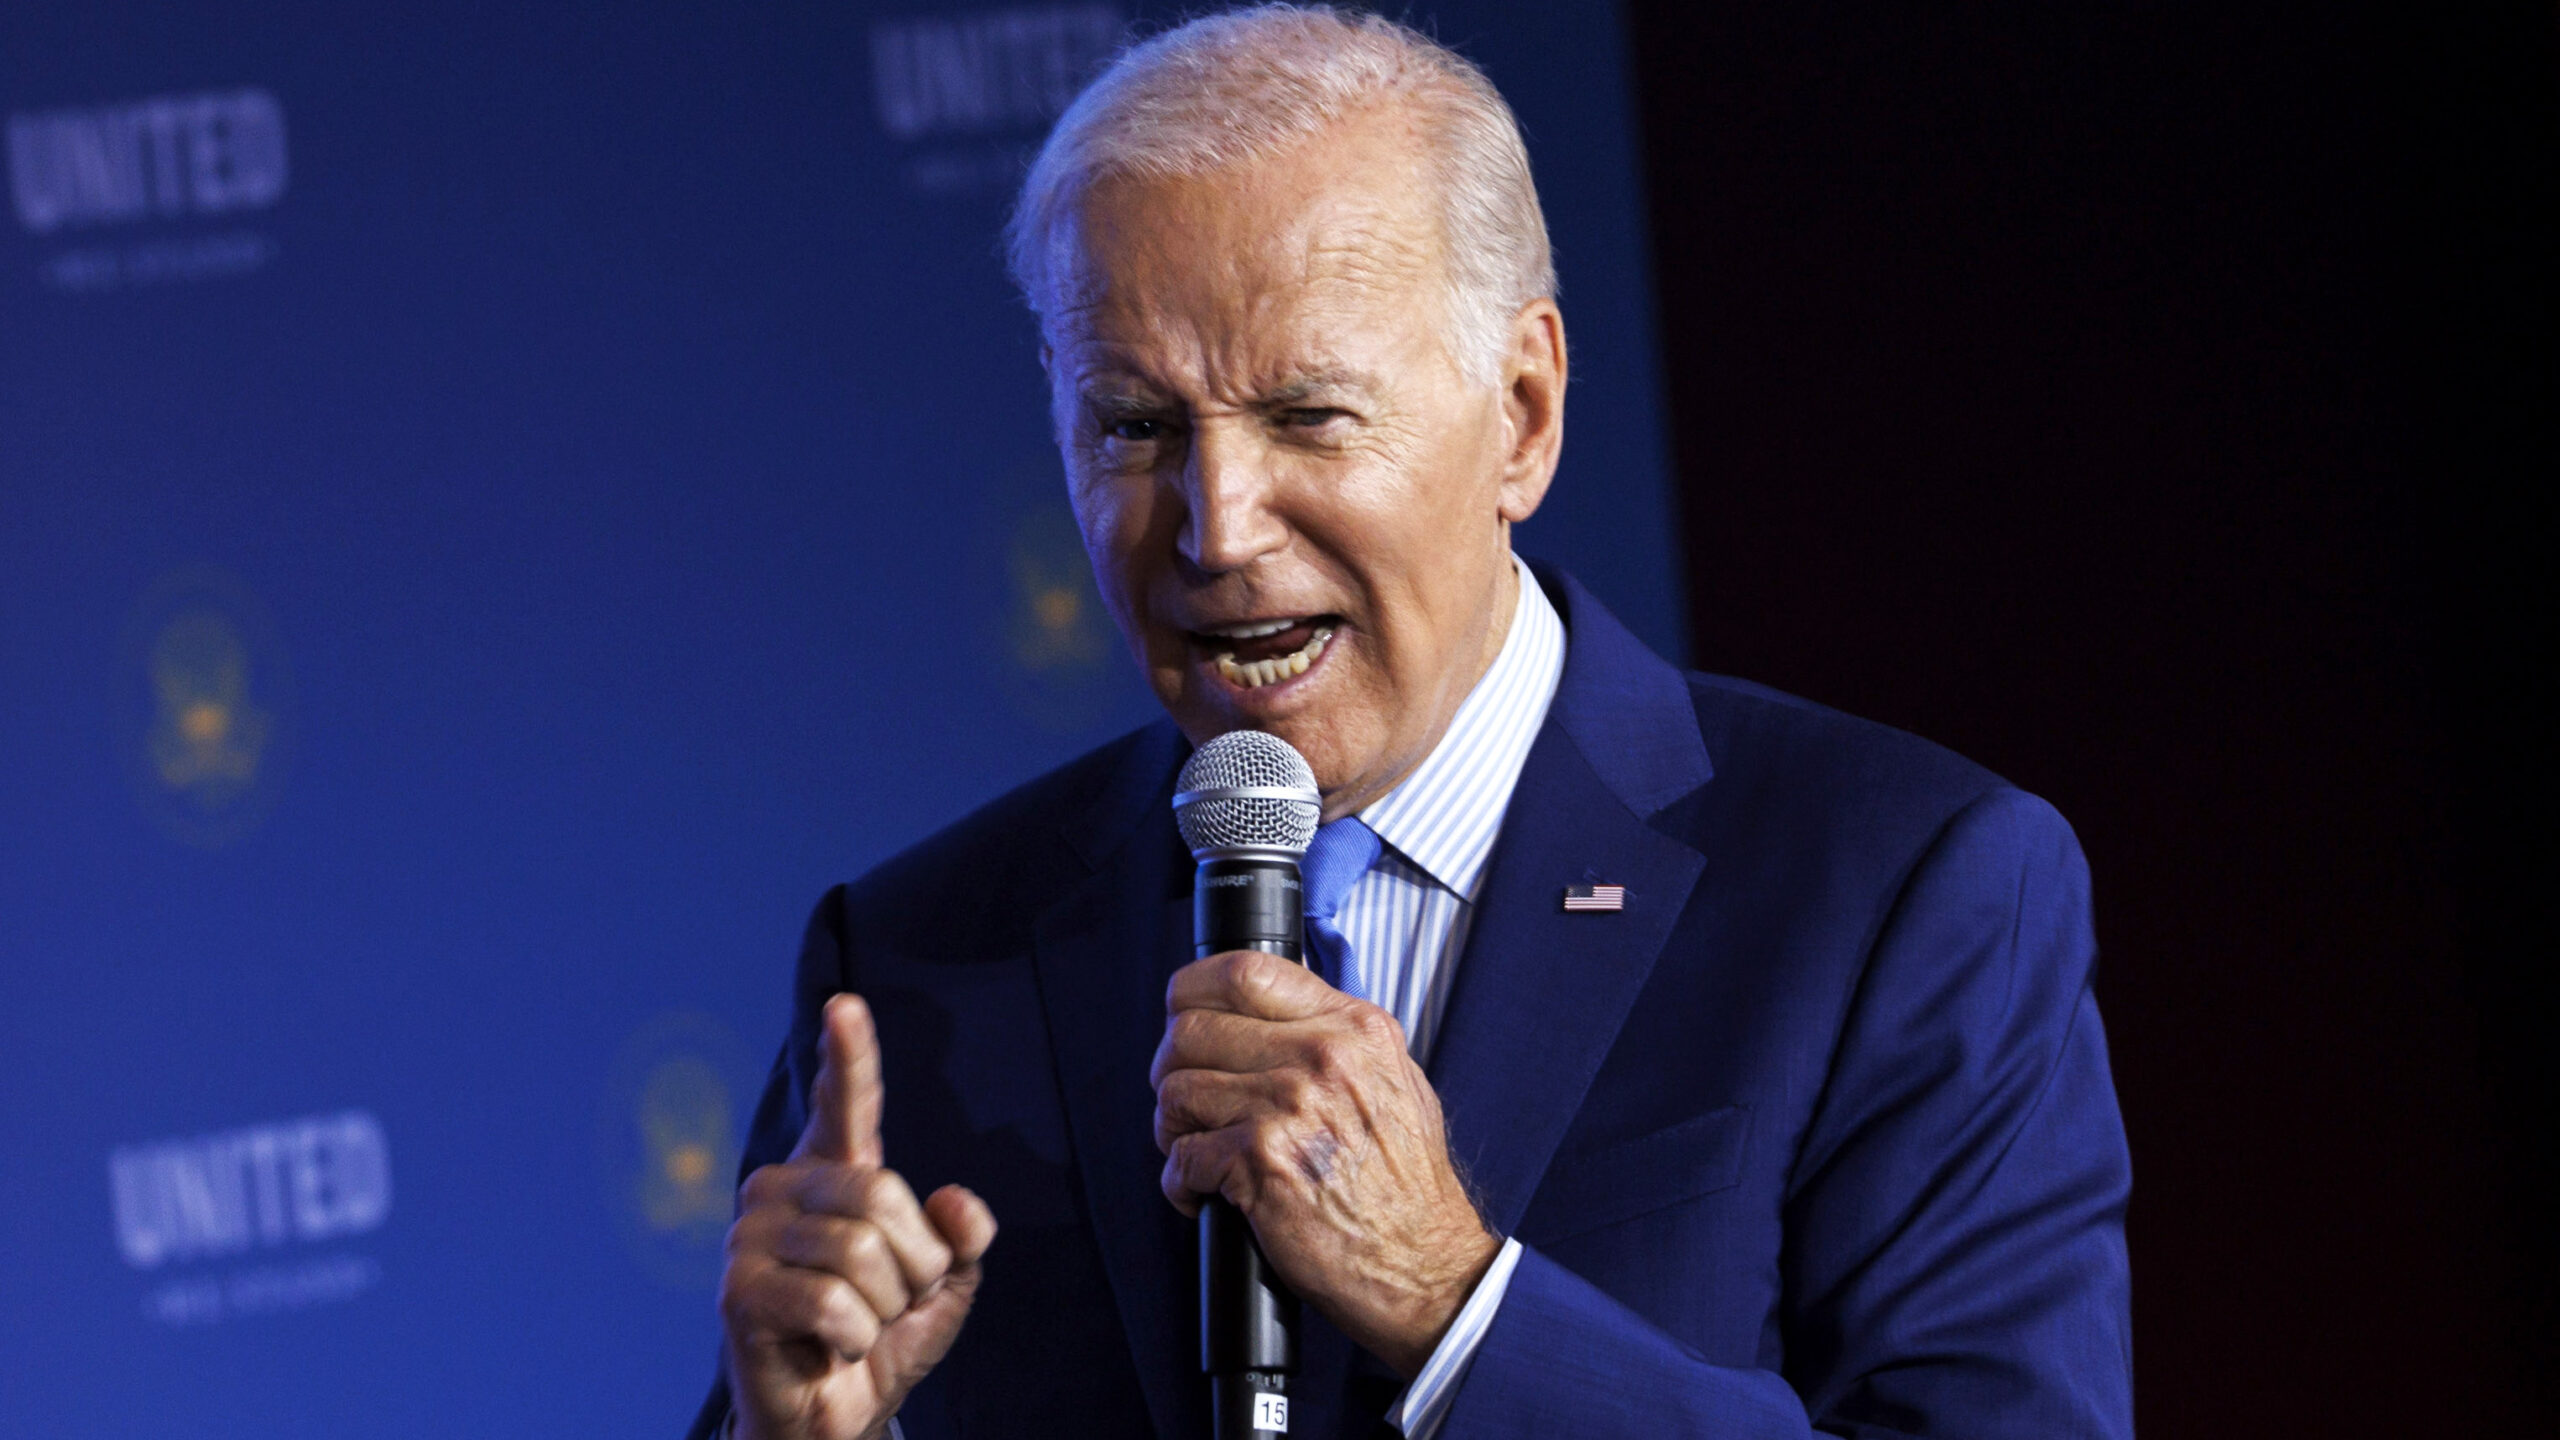 Biden Claims He’s ‘Growing The Economy’ While It Continues To Shrink, Warns Inflation Not Going Away